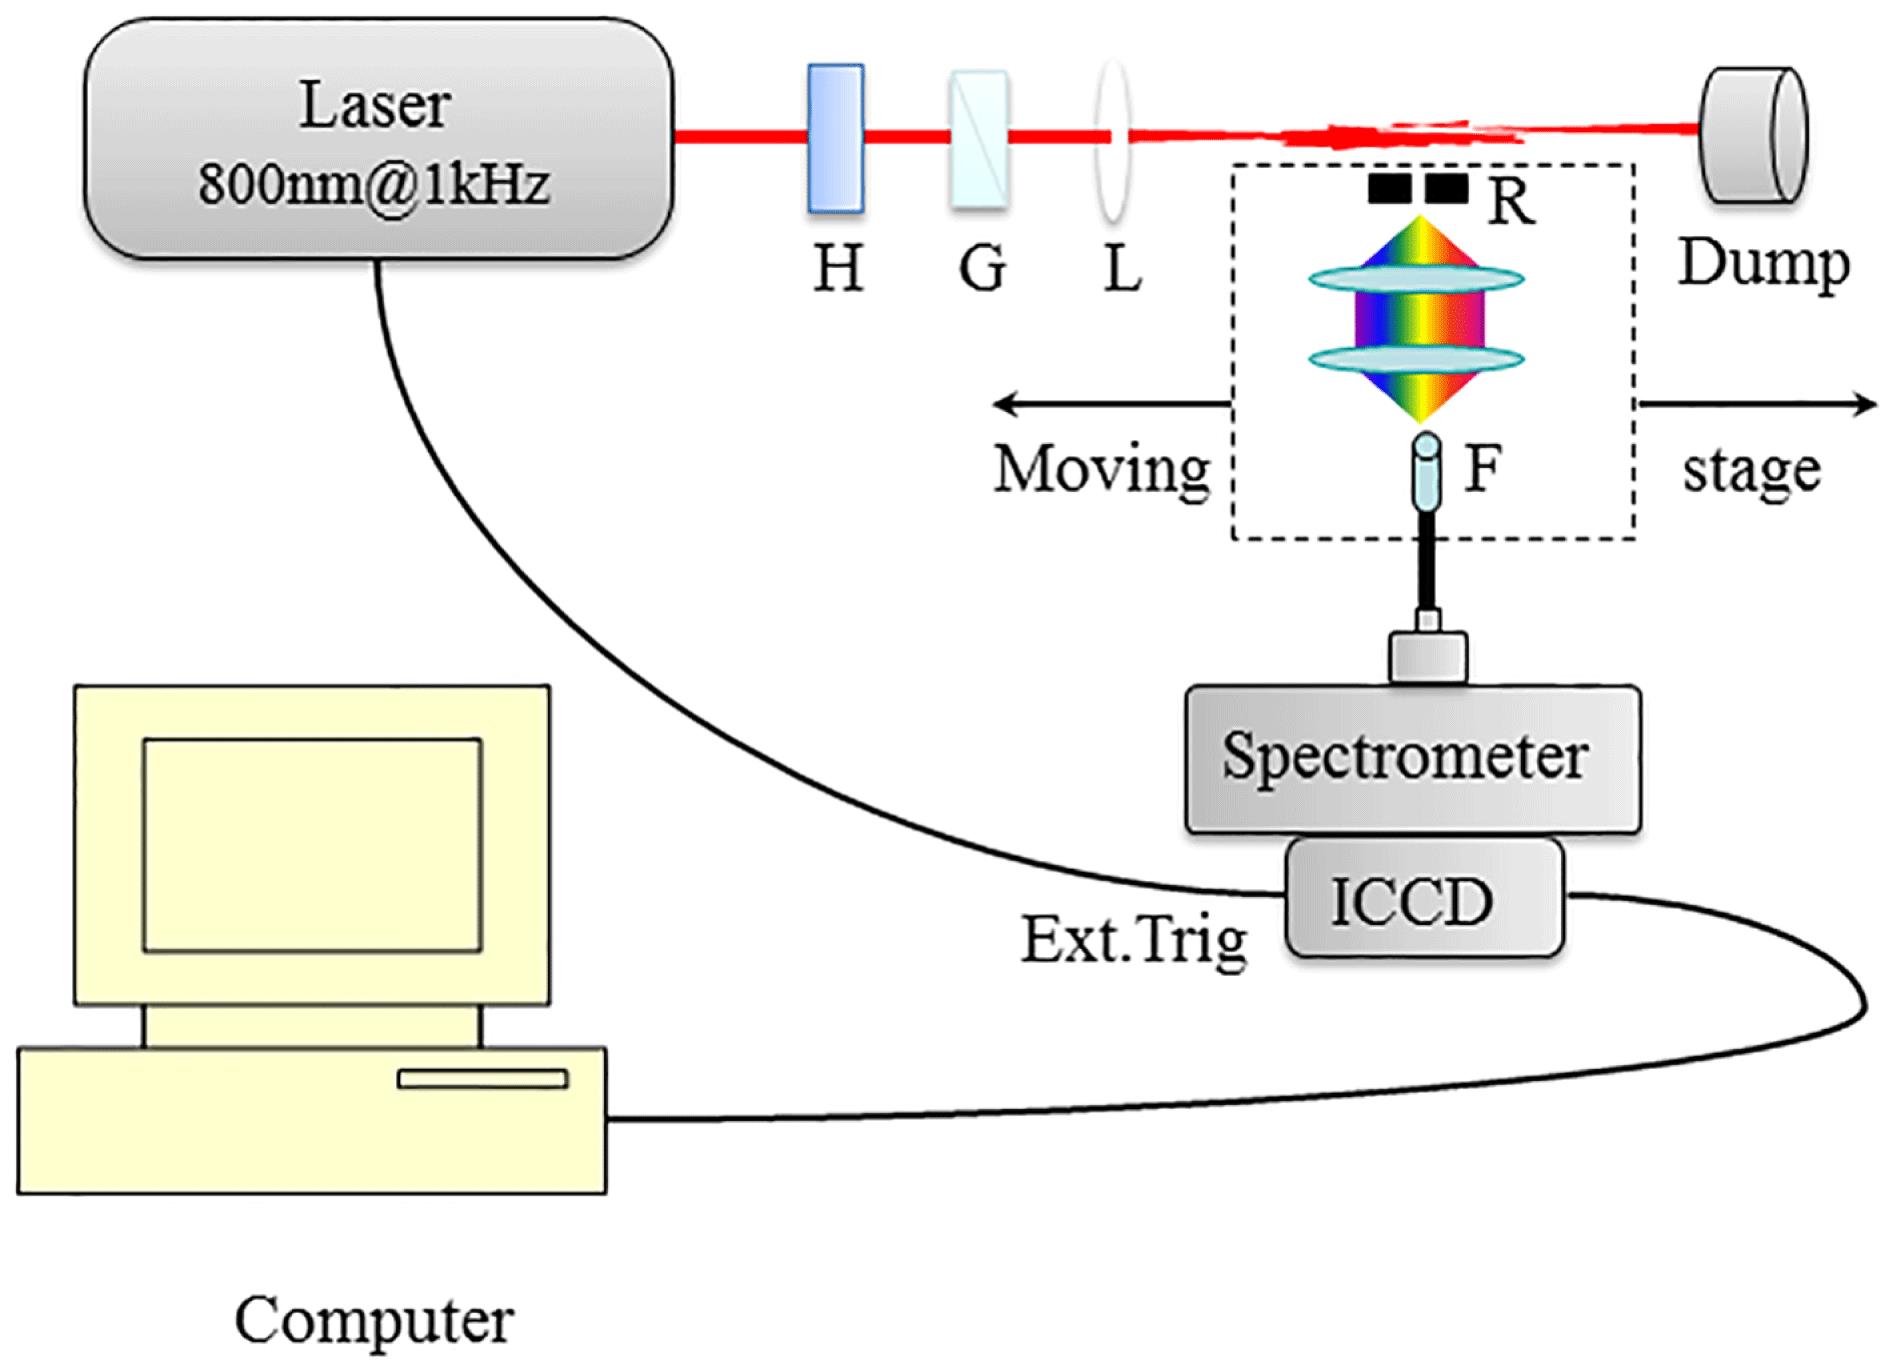 Schematic of experimental setup to measure the plasma fluorescence generated during the femtosecond filamentation in air. G: Glan prism; H: half-wave plate; L: focusing lens; R: rectangular diaphragm; F: optical fibre.